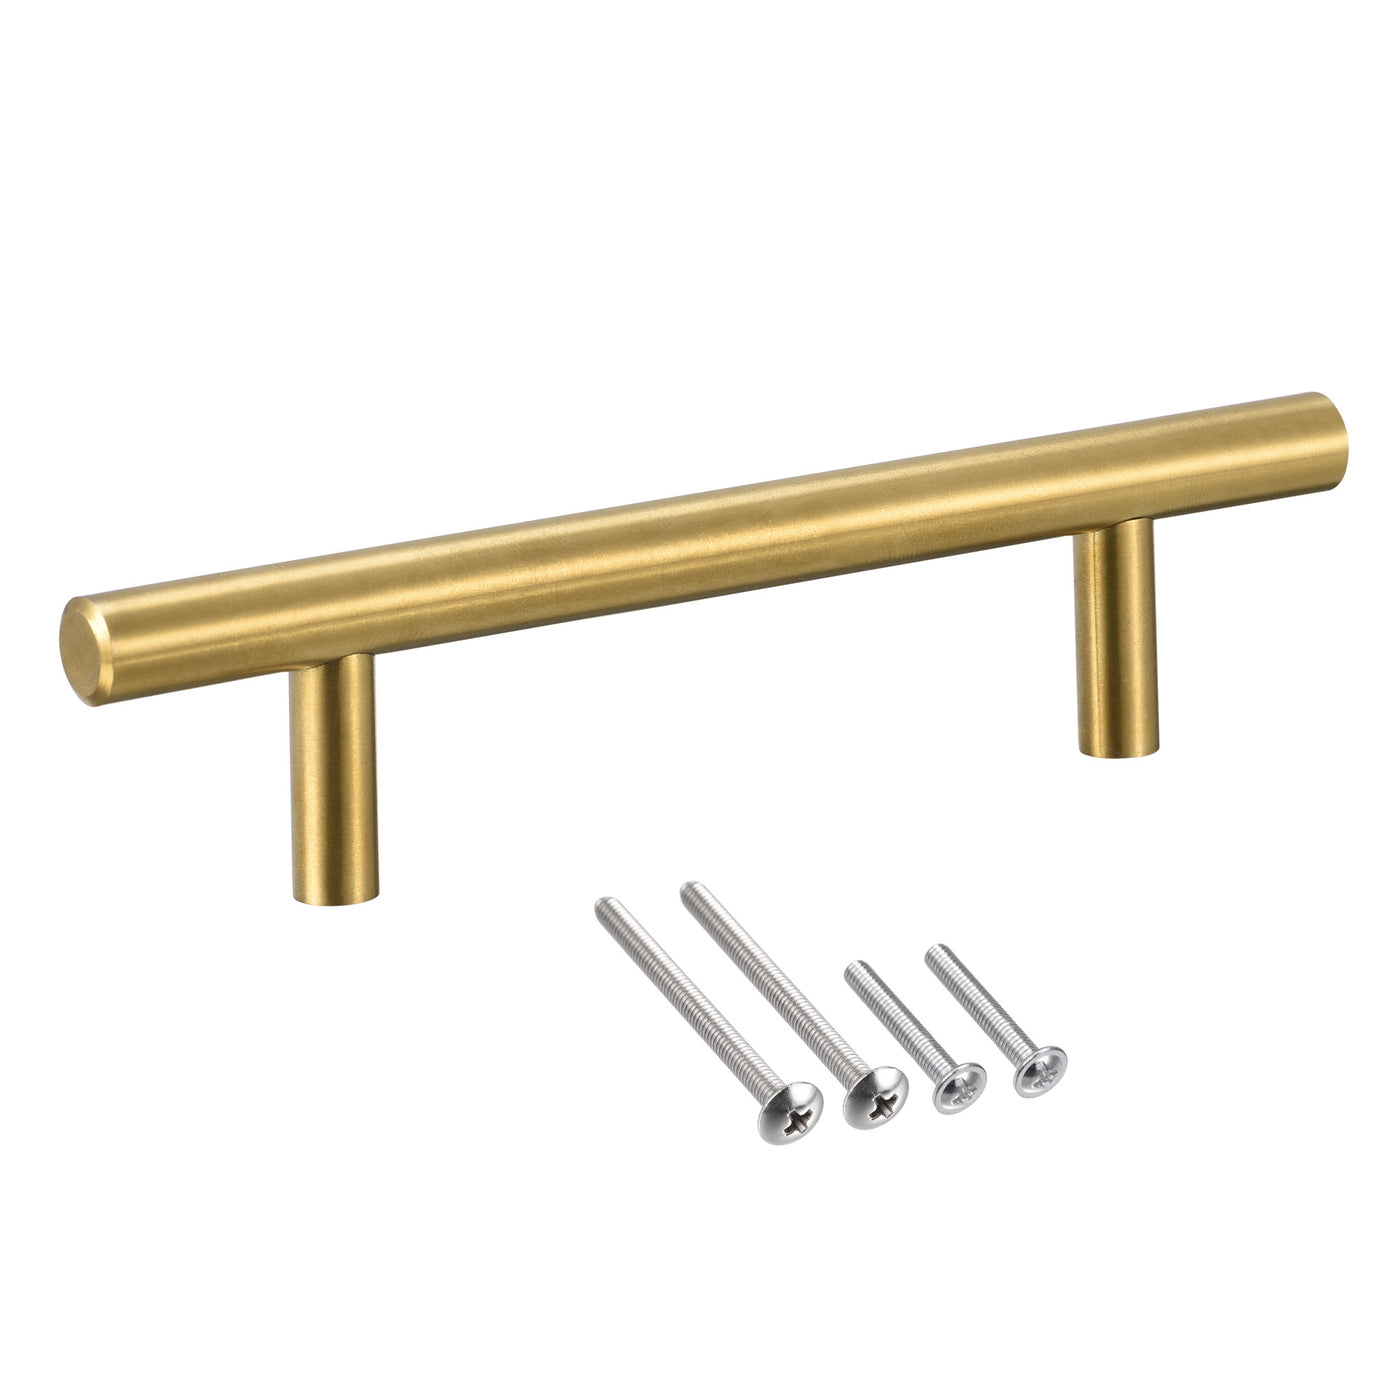 uxcell Uxcell T Bar Pull Handle, 6"(150mm) Length 10mm Dia Stainless Steel Cabinet Pulls 3.8"(96mm) Hole Center Distance Gold Tone 5pcs